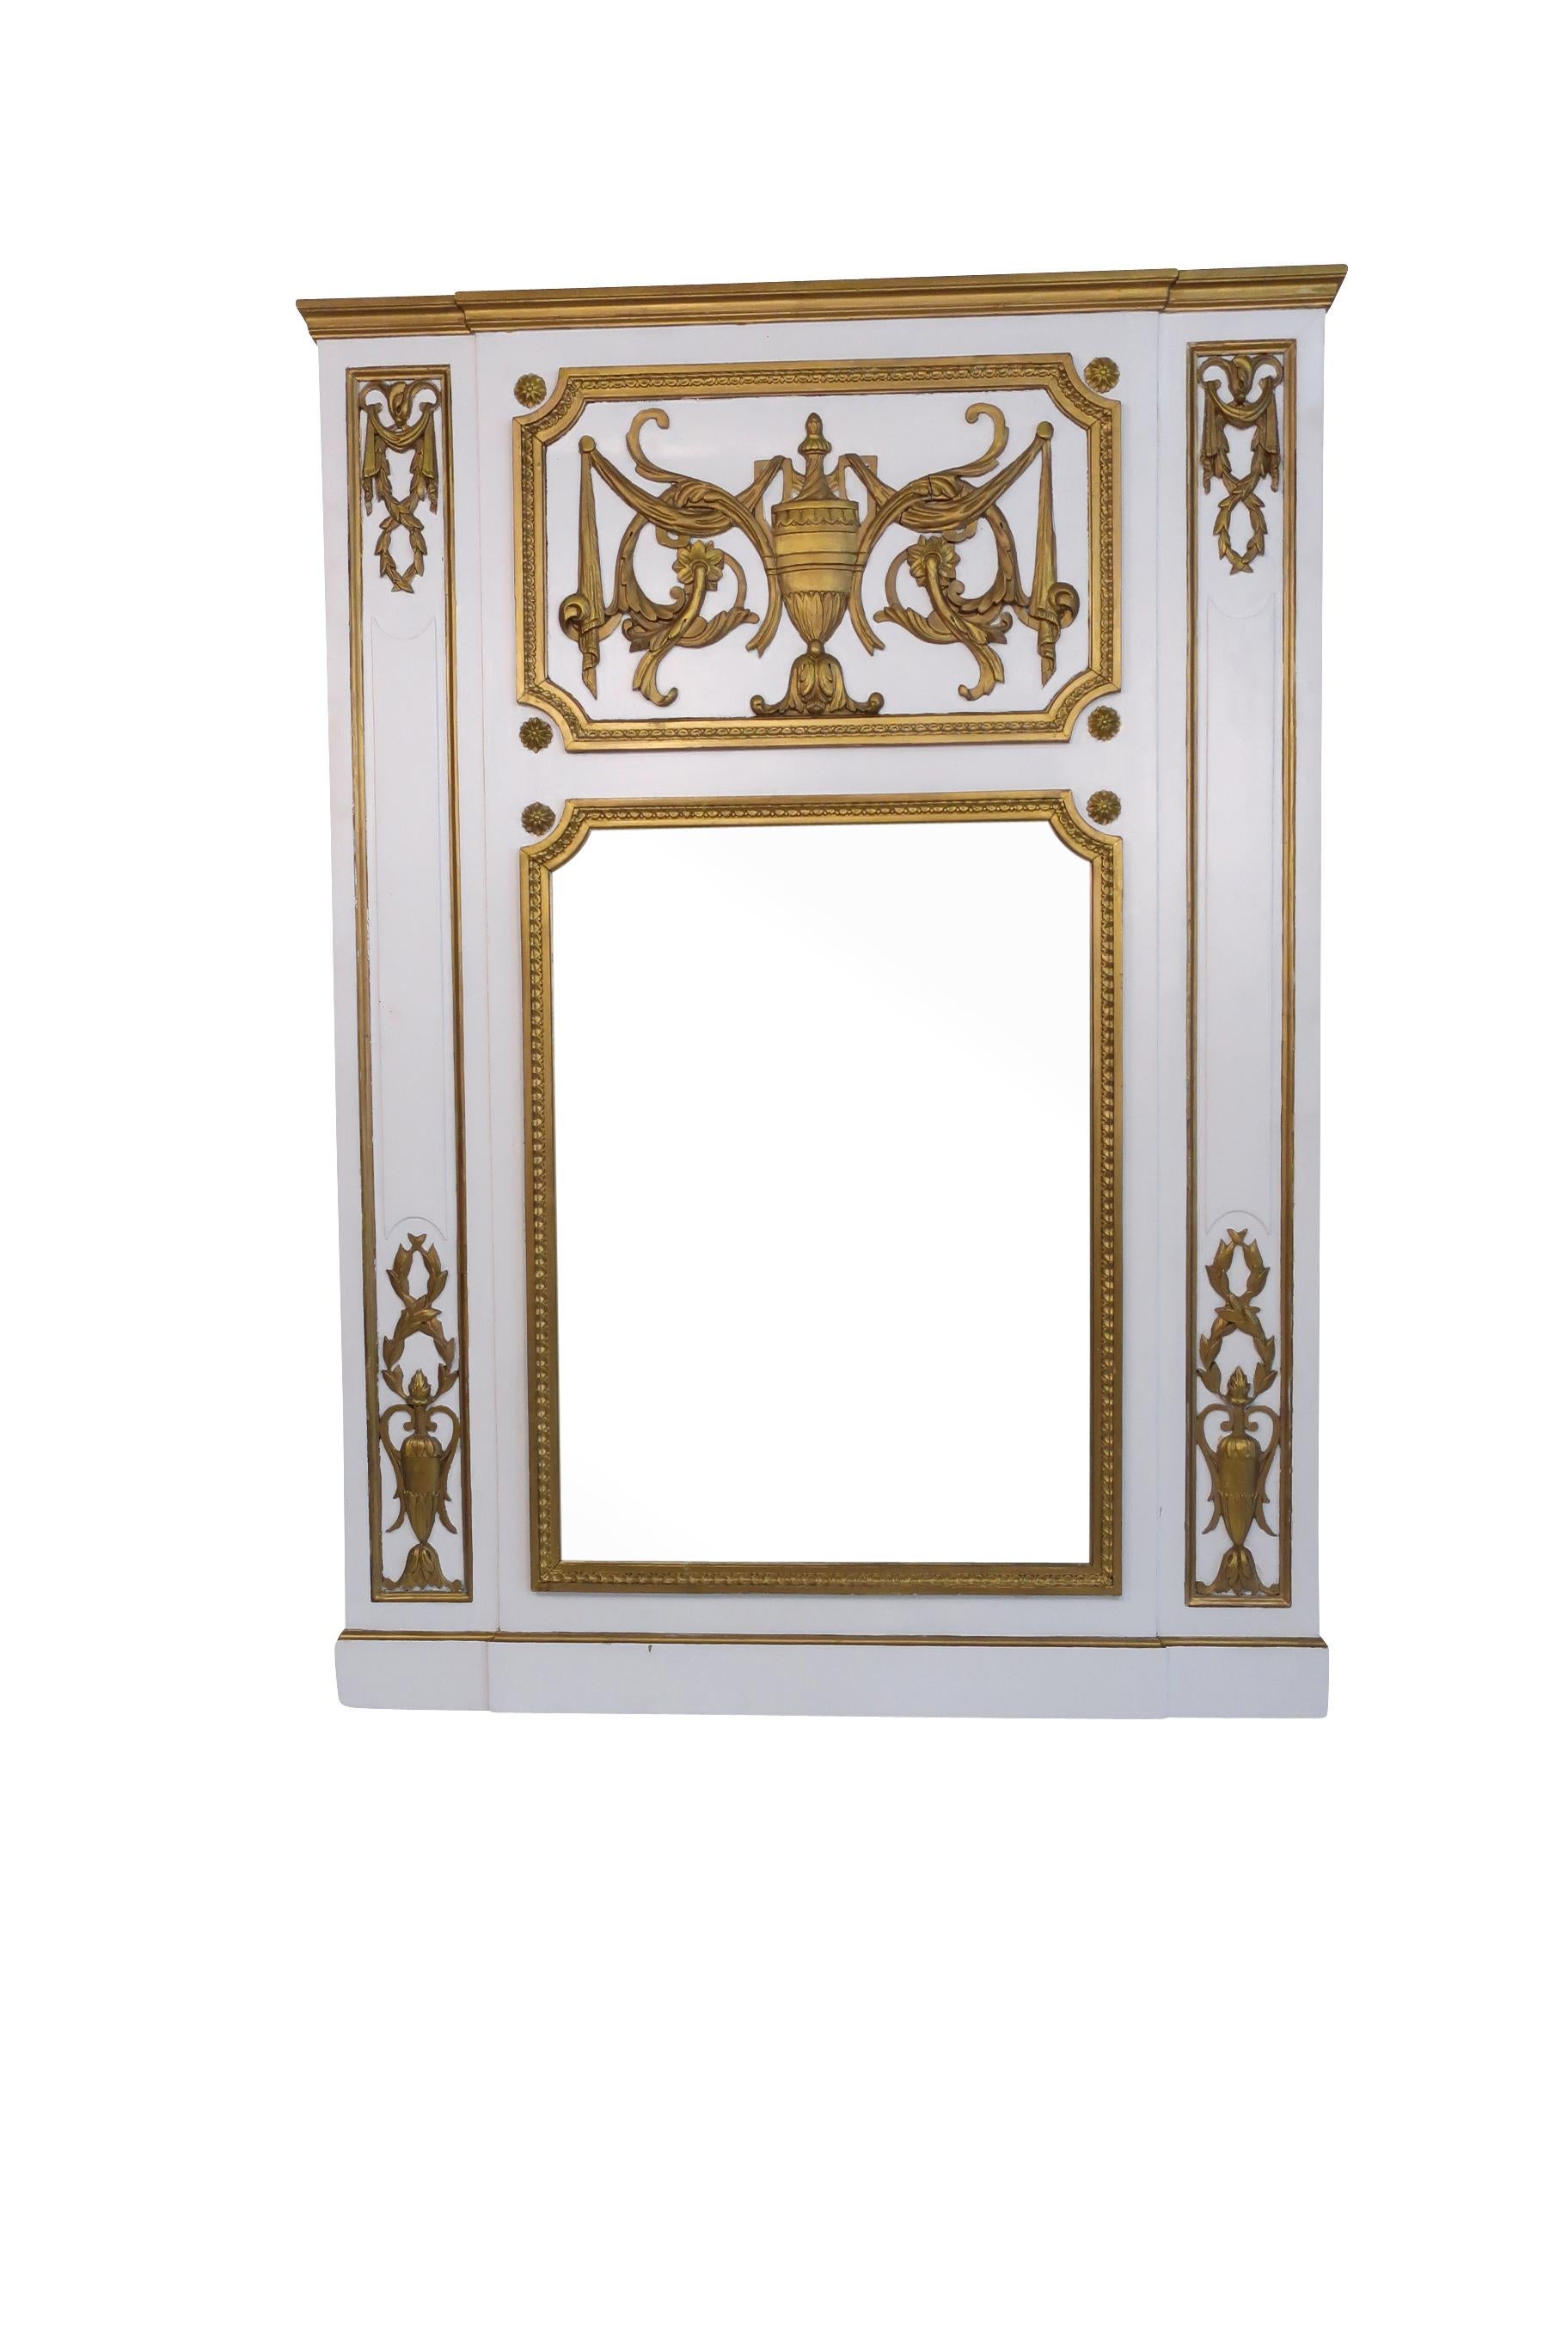 American White and Gold Trumeau Mirror with Urn and Swag Decoration